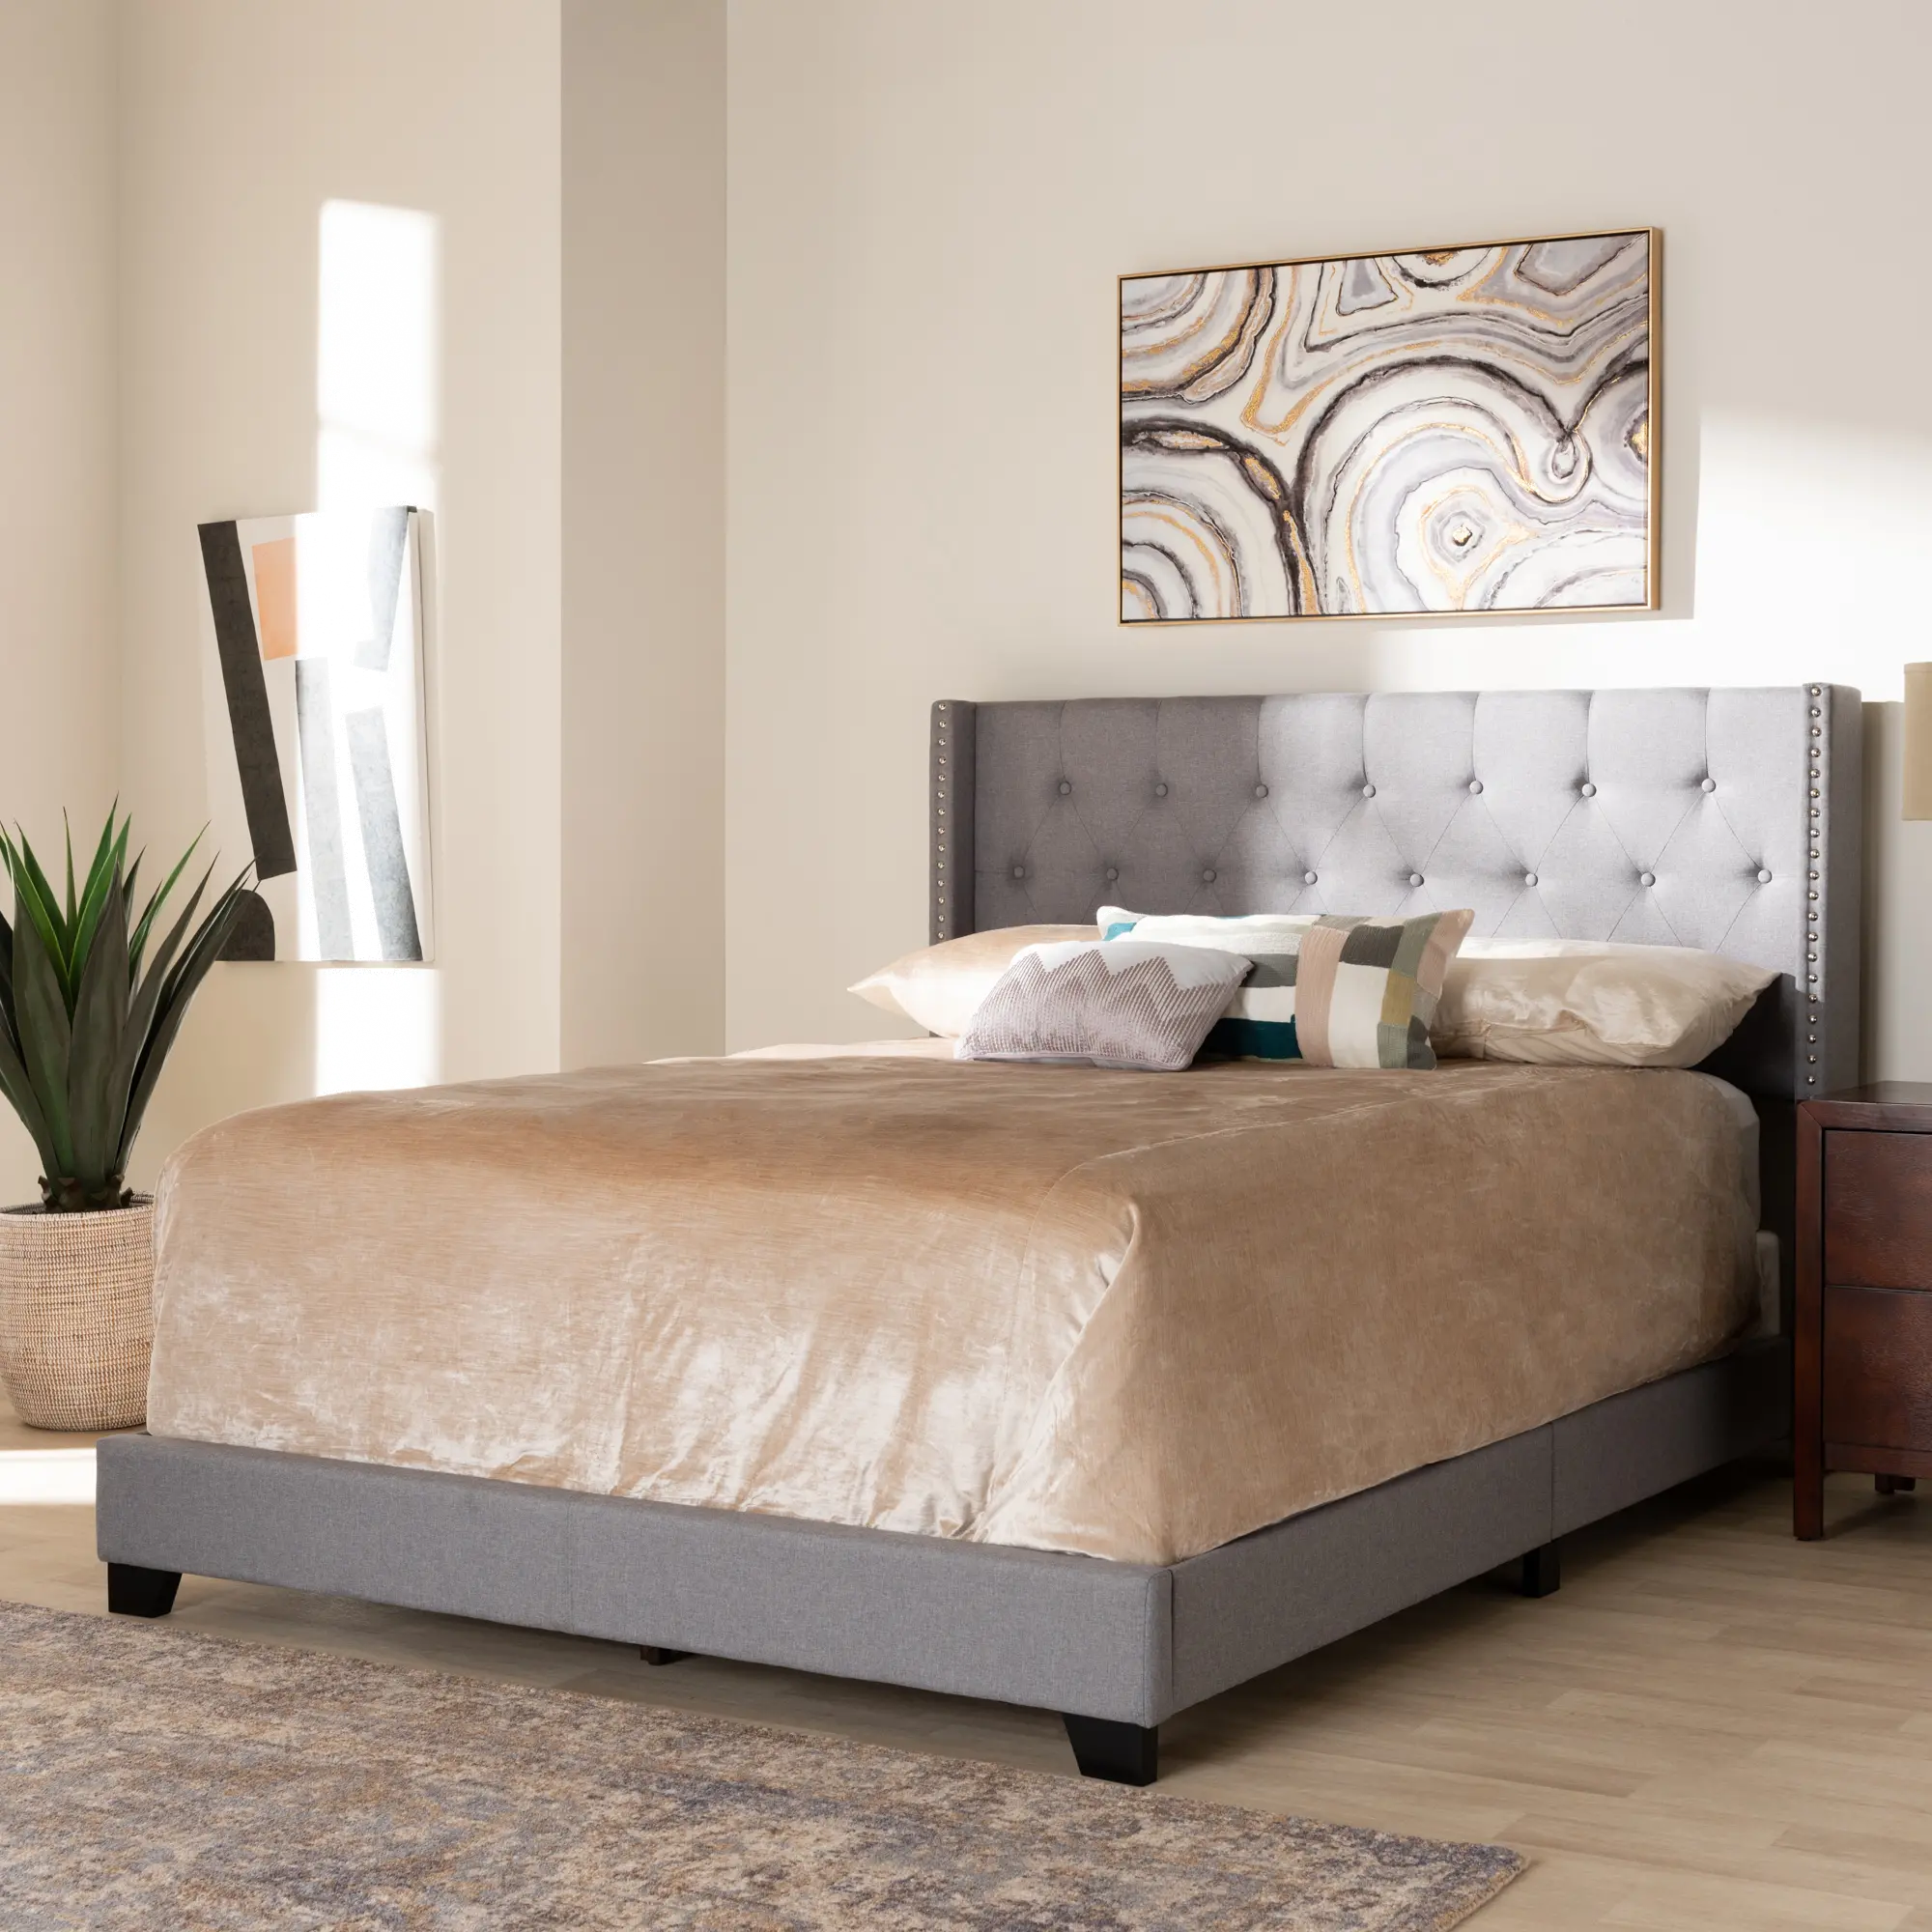 Contemporary Light Gray Upholstered Full Bed - Westley